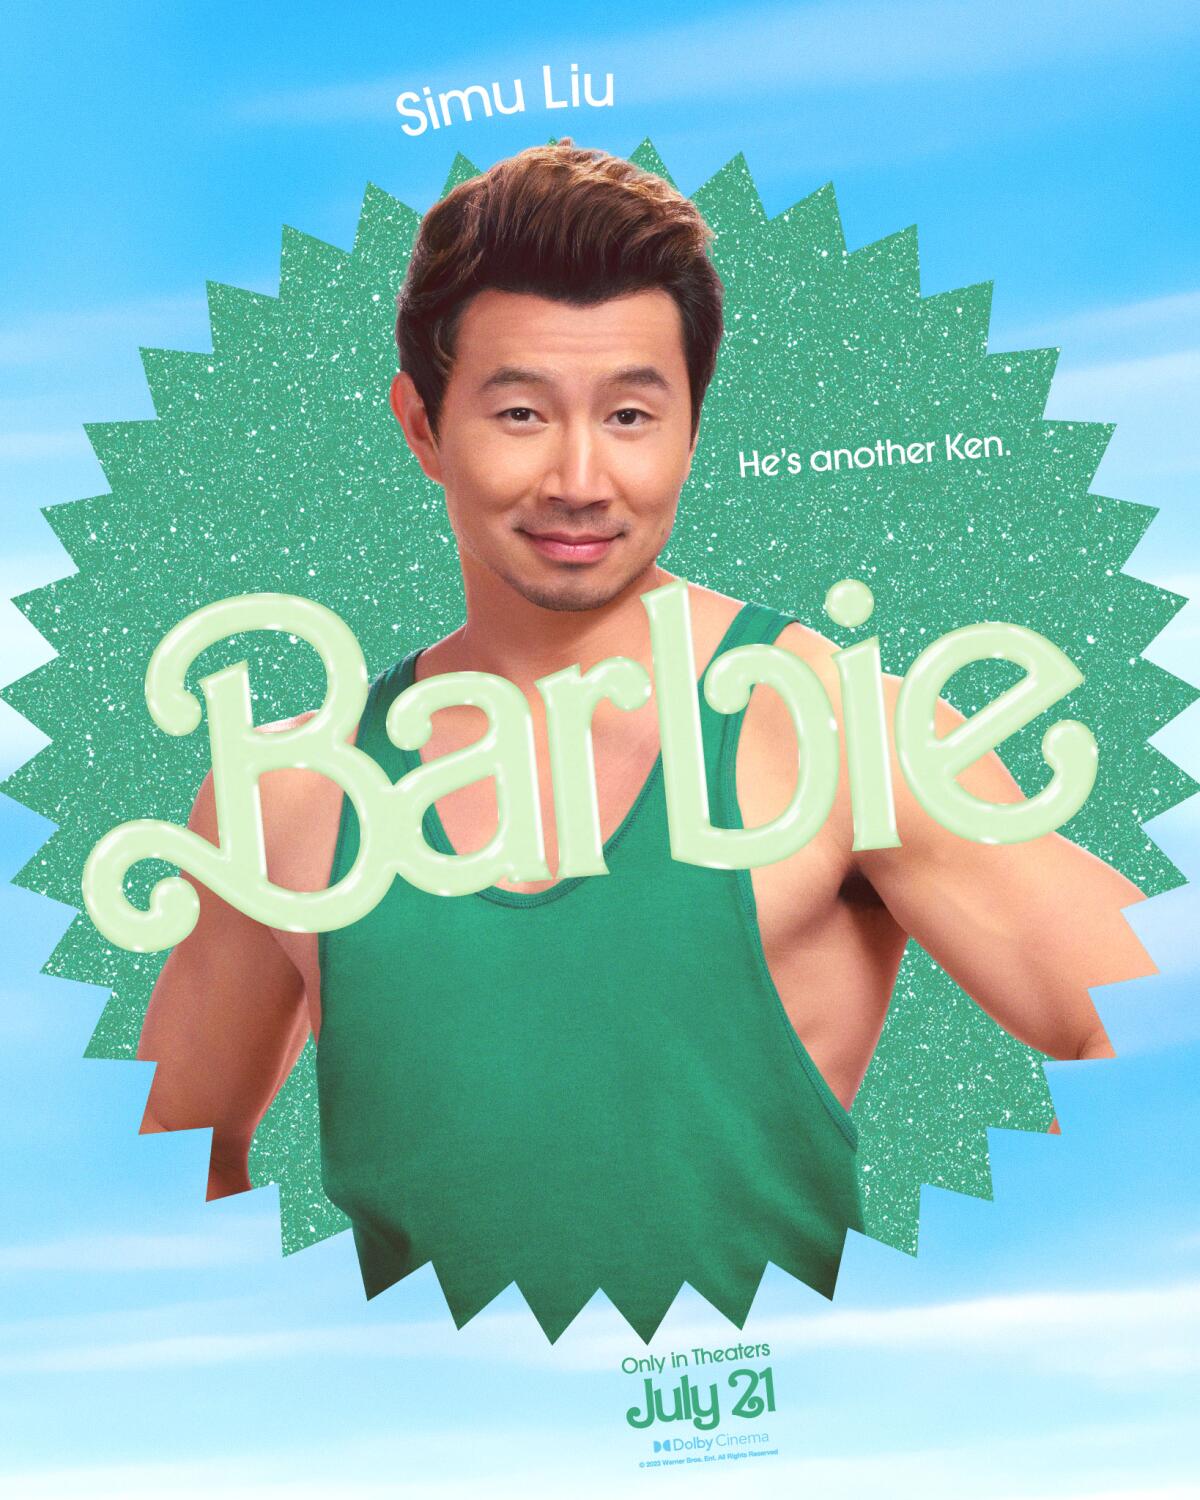 Simu Liu poses with his hands on his hips in a "Barbie" movie poster. He wears a green muscle tee.